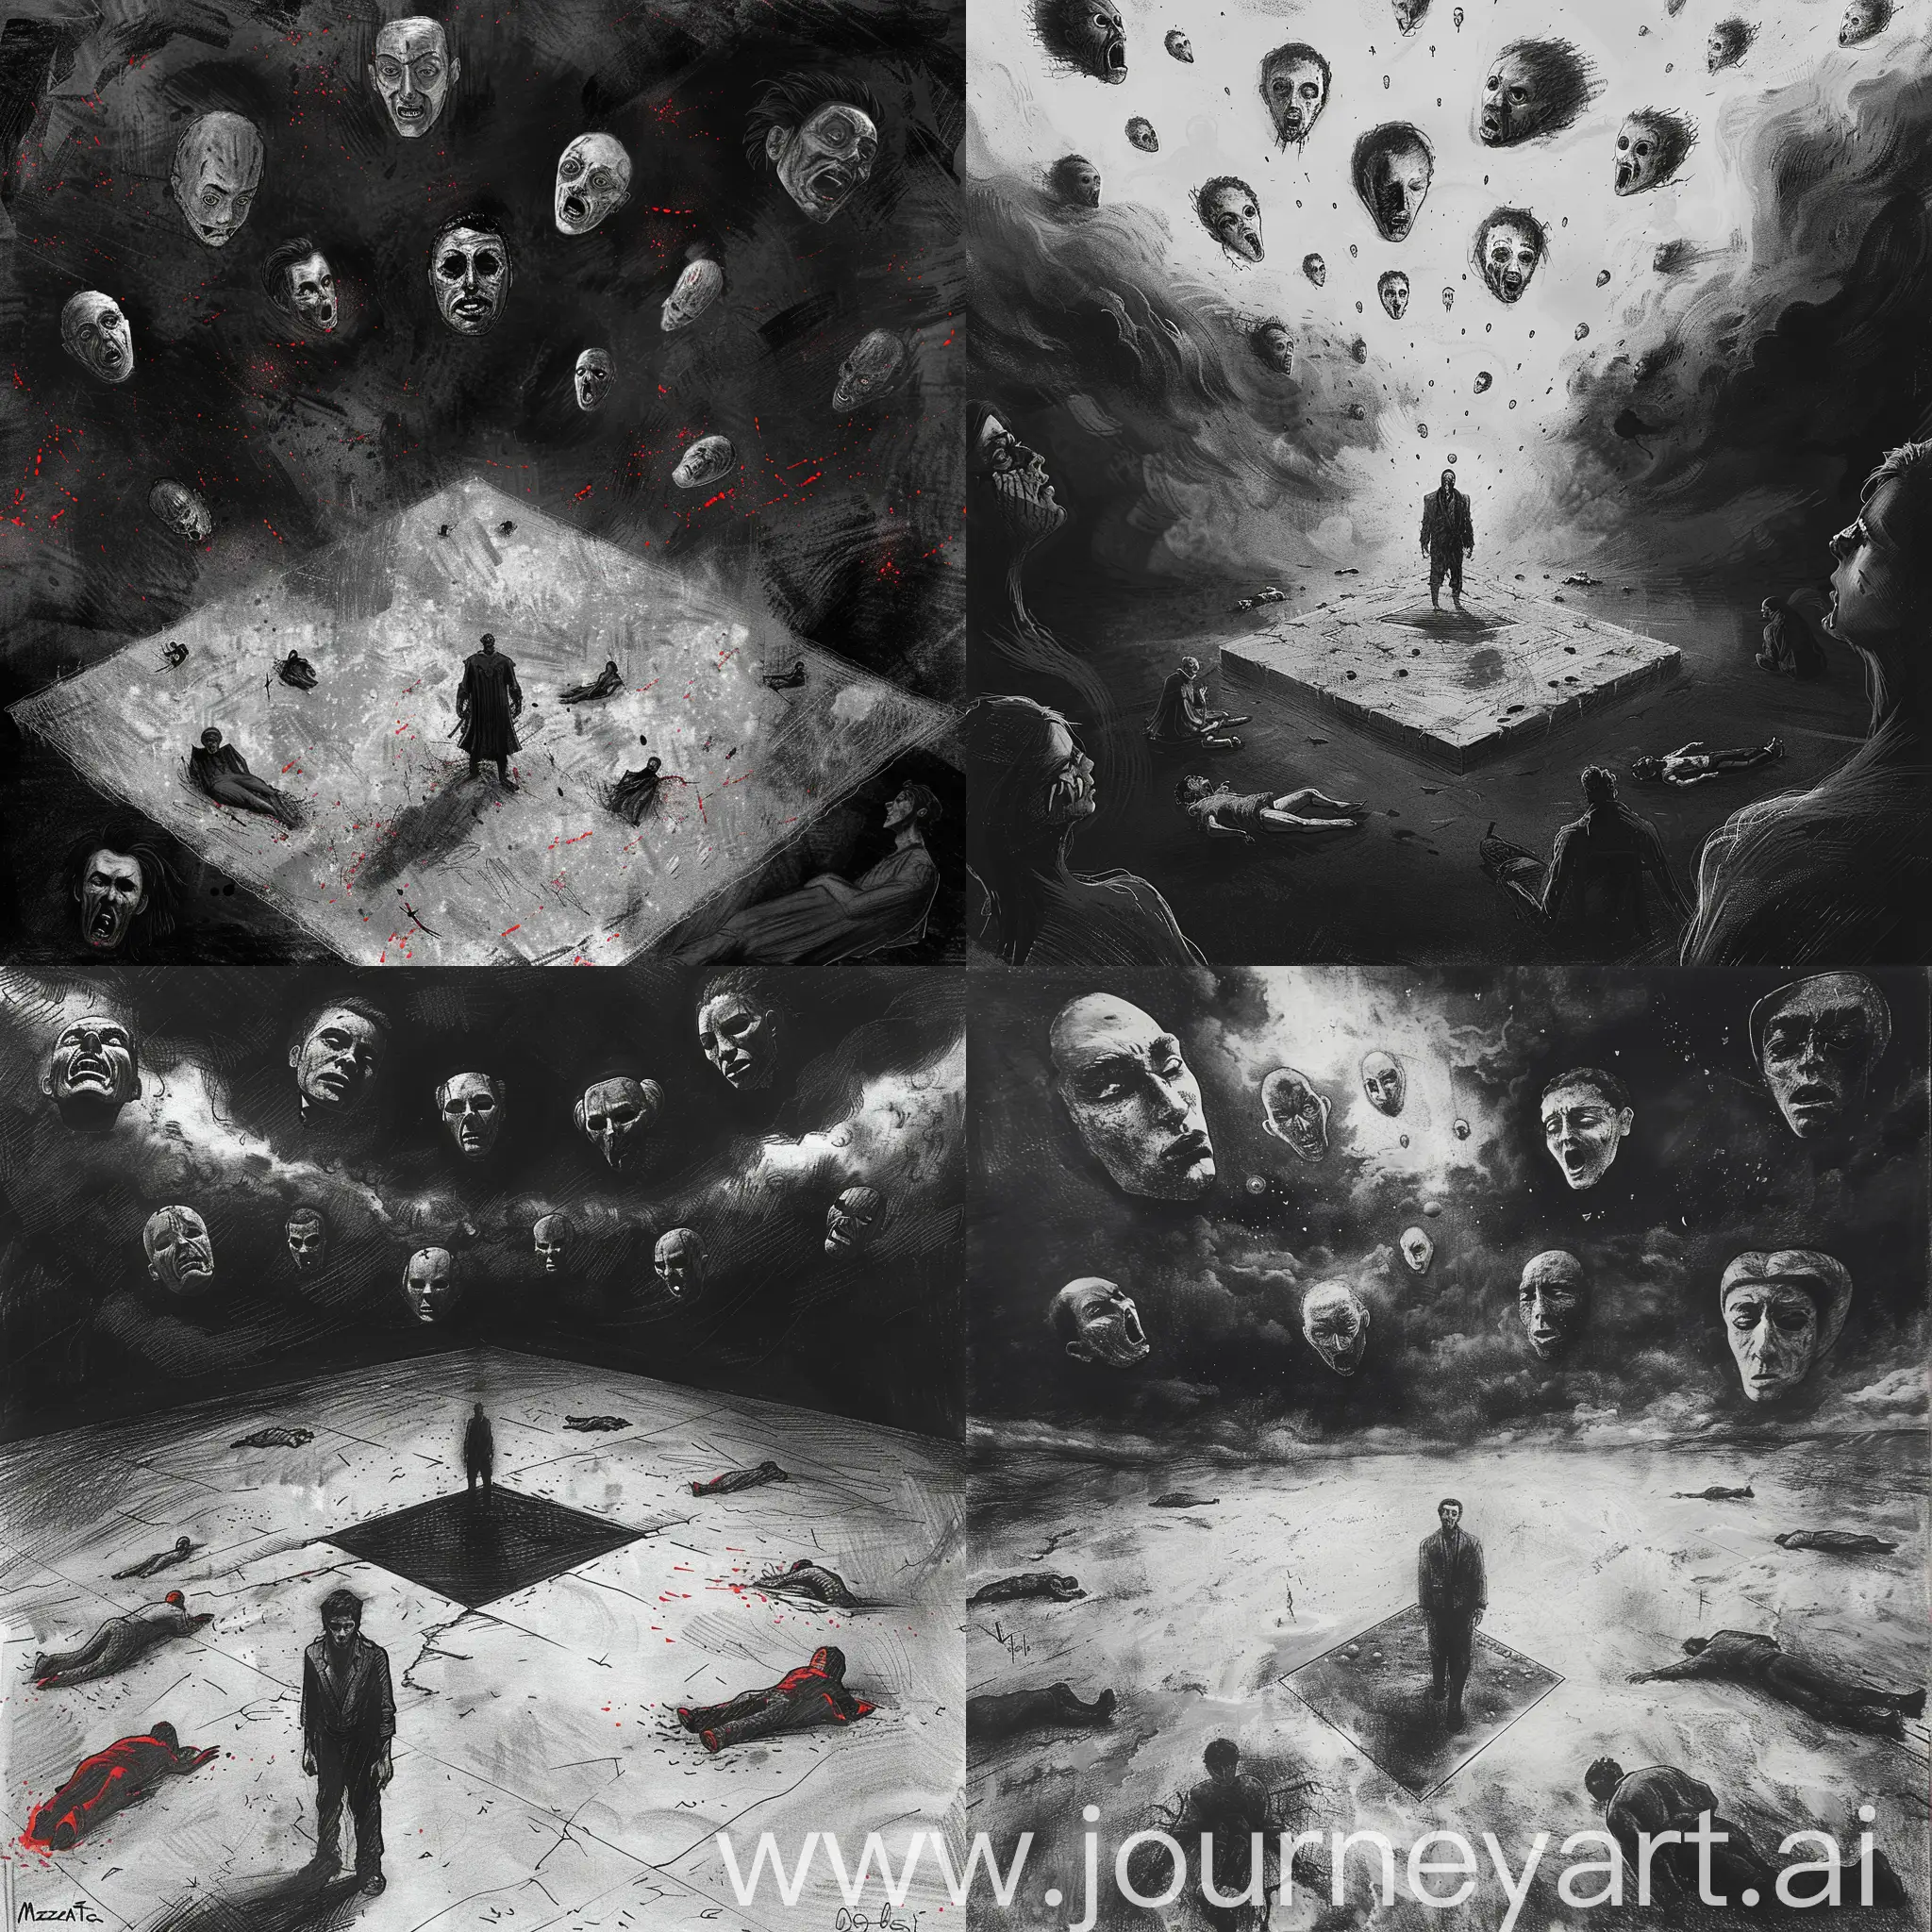 Create a design in charcoal or sketch style. The design should depict Azrael standing in a square-like area as if viewed from above at a 45-degree angle, giving a distant appearance. It's essential to portray Azrael in a detailed and realistic manner with a serious expression. Surrounding Azrael, there should be surreal masks floating in the sky. The design should be predominantly black and white, with a dark atmosphere. Use litle red tones to draw attention, ensuring they are darker and contribute to the overall gloomy atmosphere. Avoid a cartoonish look and focus on strongly reflecting the theme of death. Include a few human figures lying on the ground, as well as on the sides, barely discernible from a distance, showing fear and horror. Let the design be predominantly dark and gloomy, with black tones prevailing.
